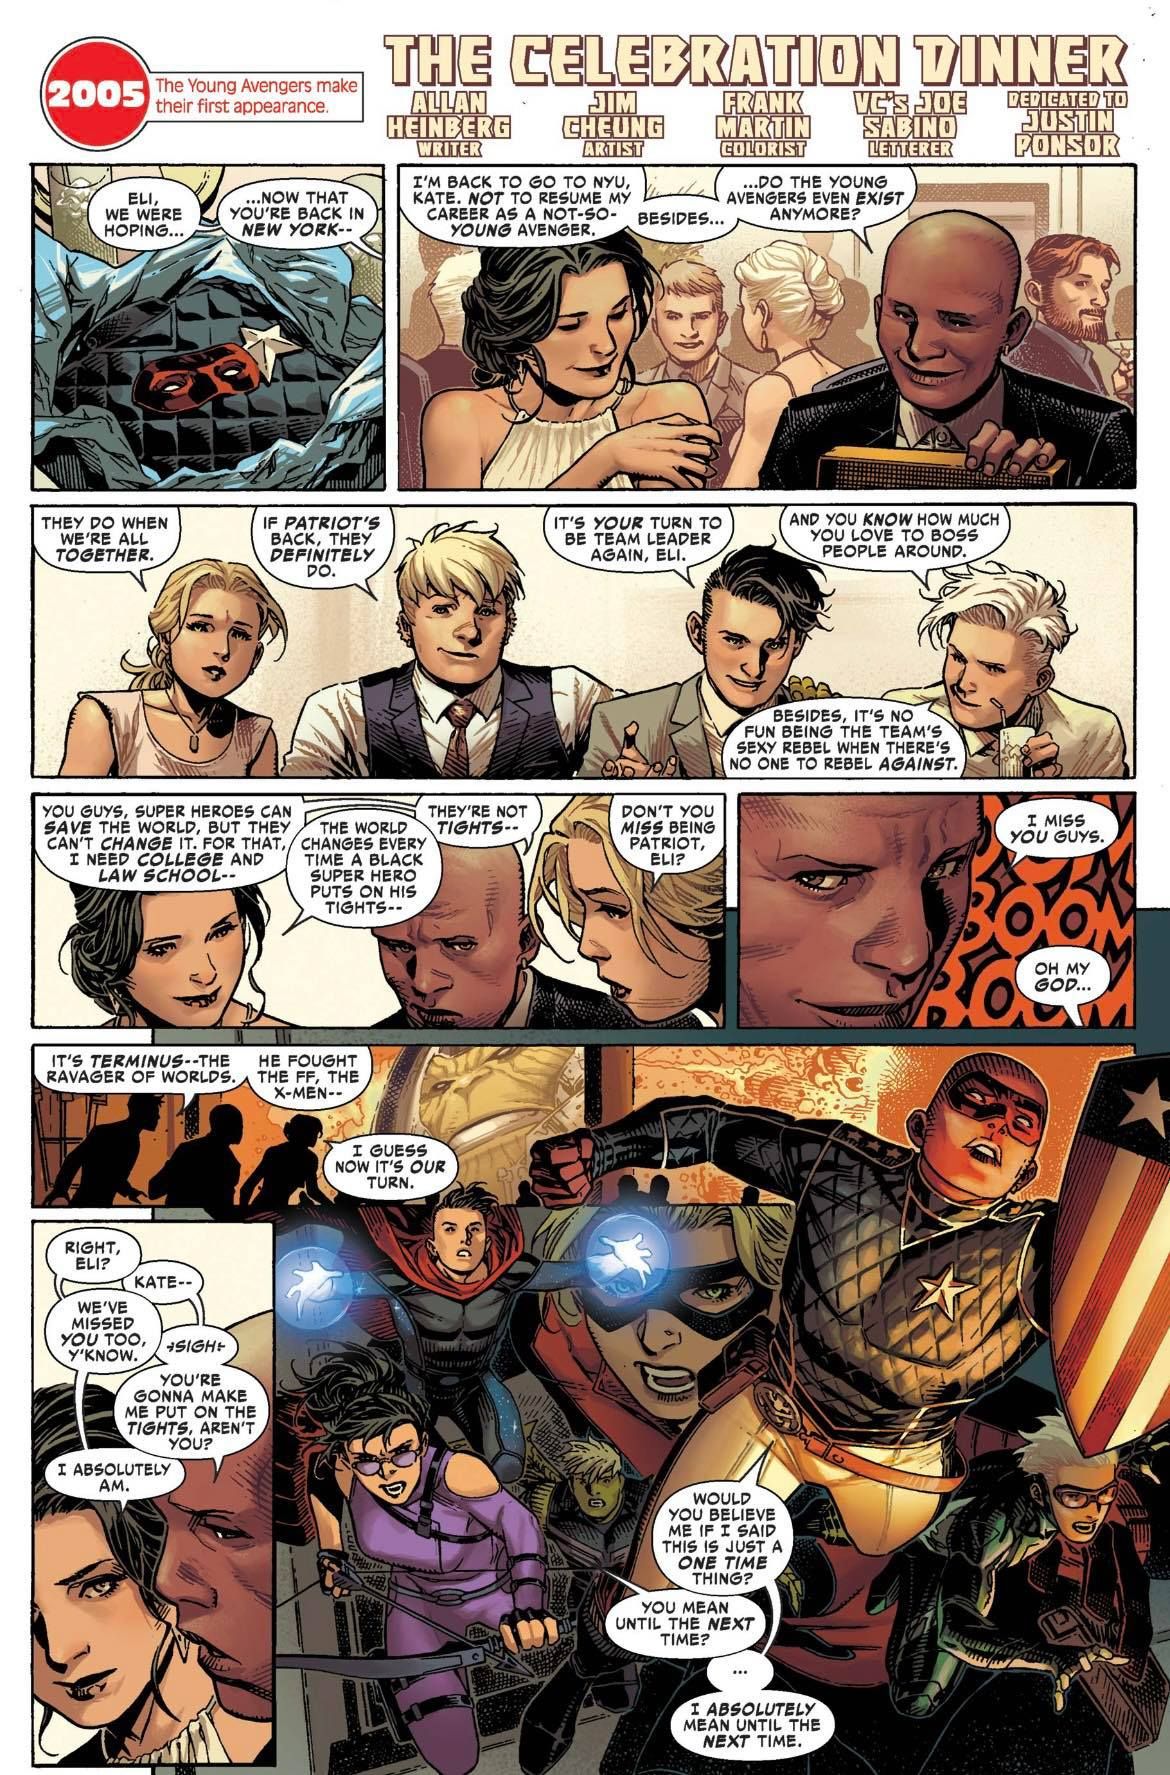 Young Avengers meet up for dinner in Marvel #1000.